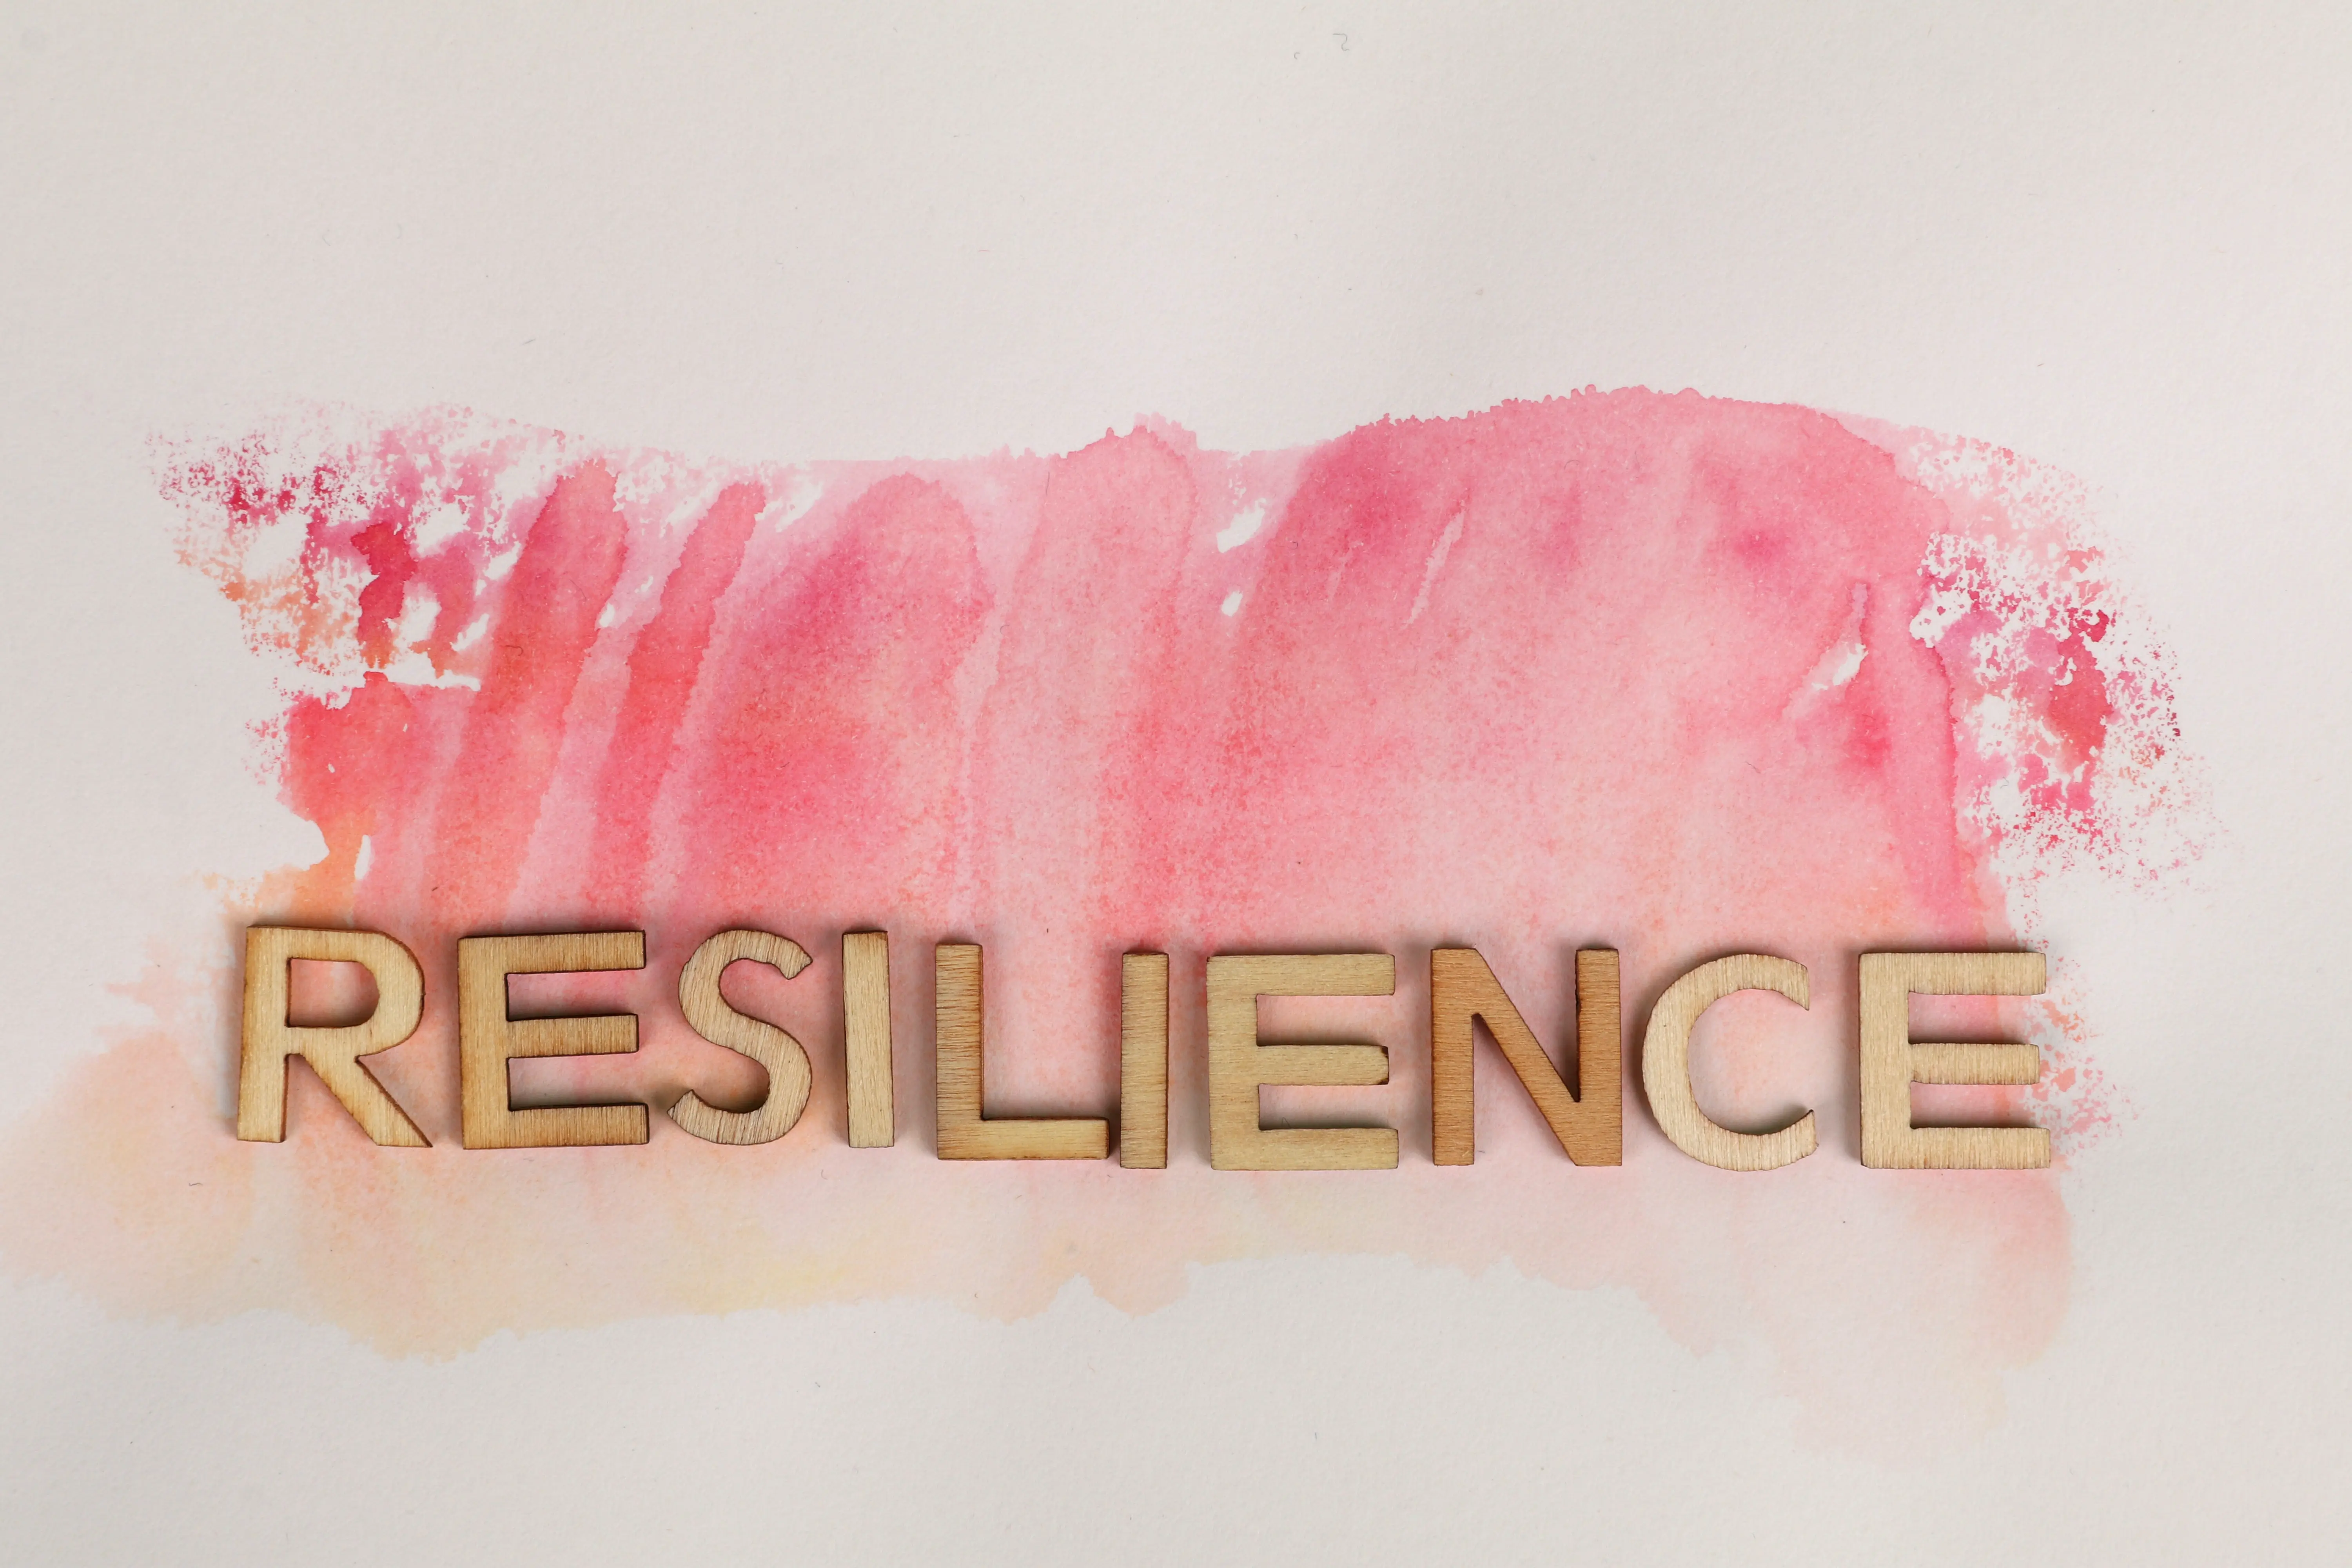 Resilience - How To Build It And Live A Happy Life